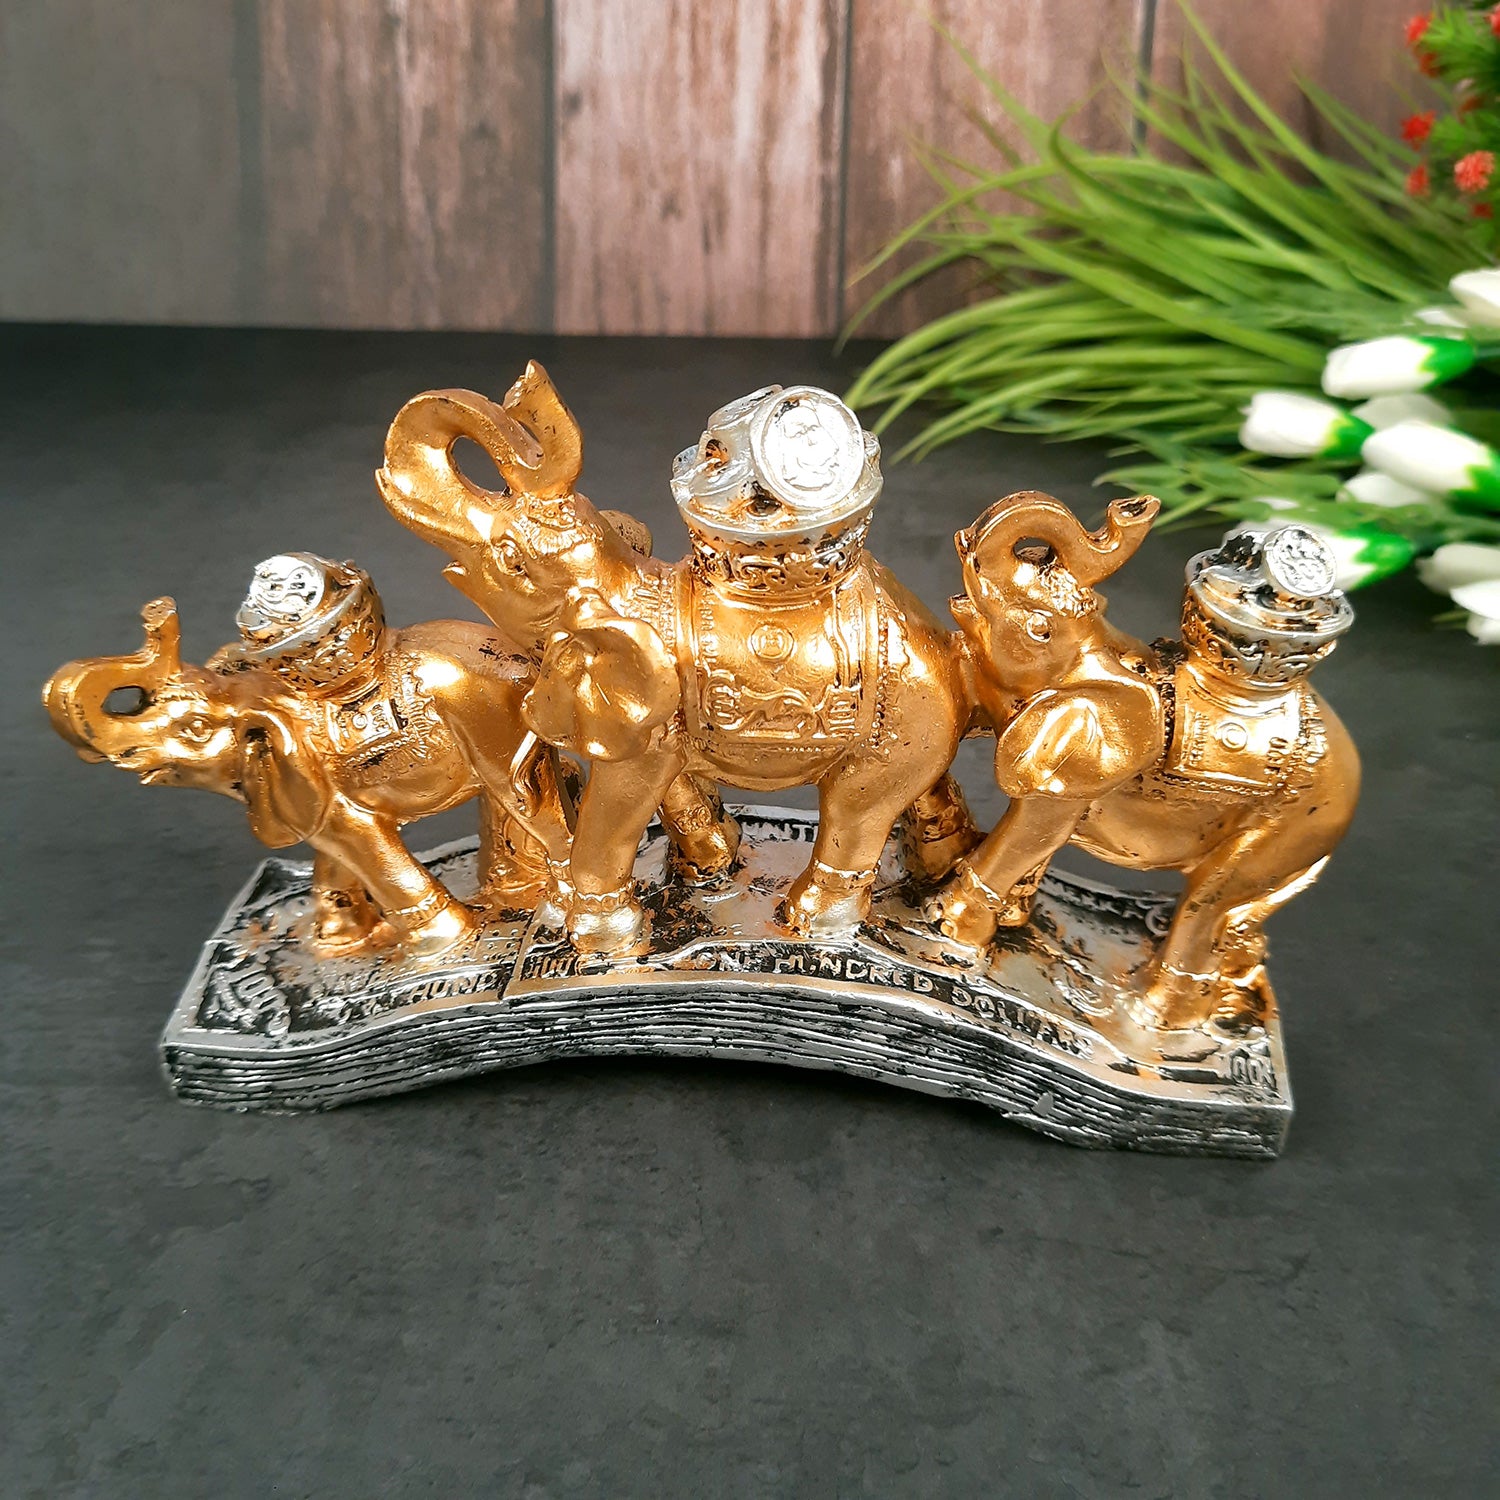 Elephant Statue Showpiece Trunk Up | Fengshui 3 Elephant Figurine With Gold Coins Pot - For Vastu, Good Fortune, Wealth, Strength | For Home Decor, Living Room, Office & Gift - 8 Inch - Apkamart